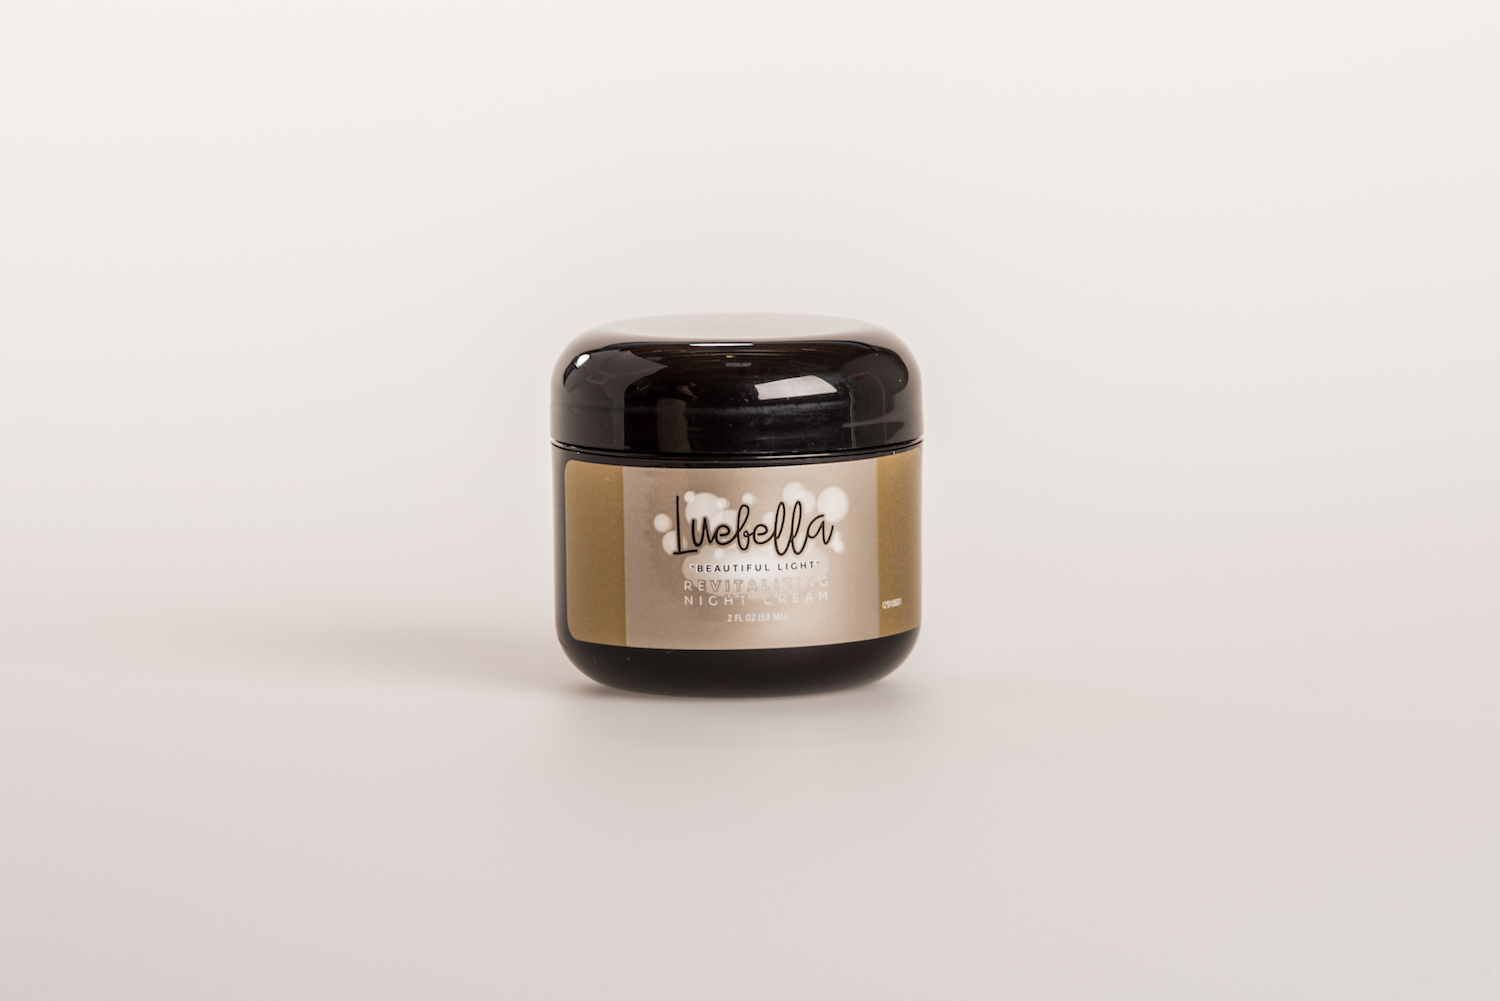 Luebella Revitalizing Night Cream has a key ingredient for anti-aging skin care products. 